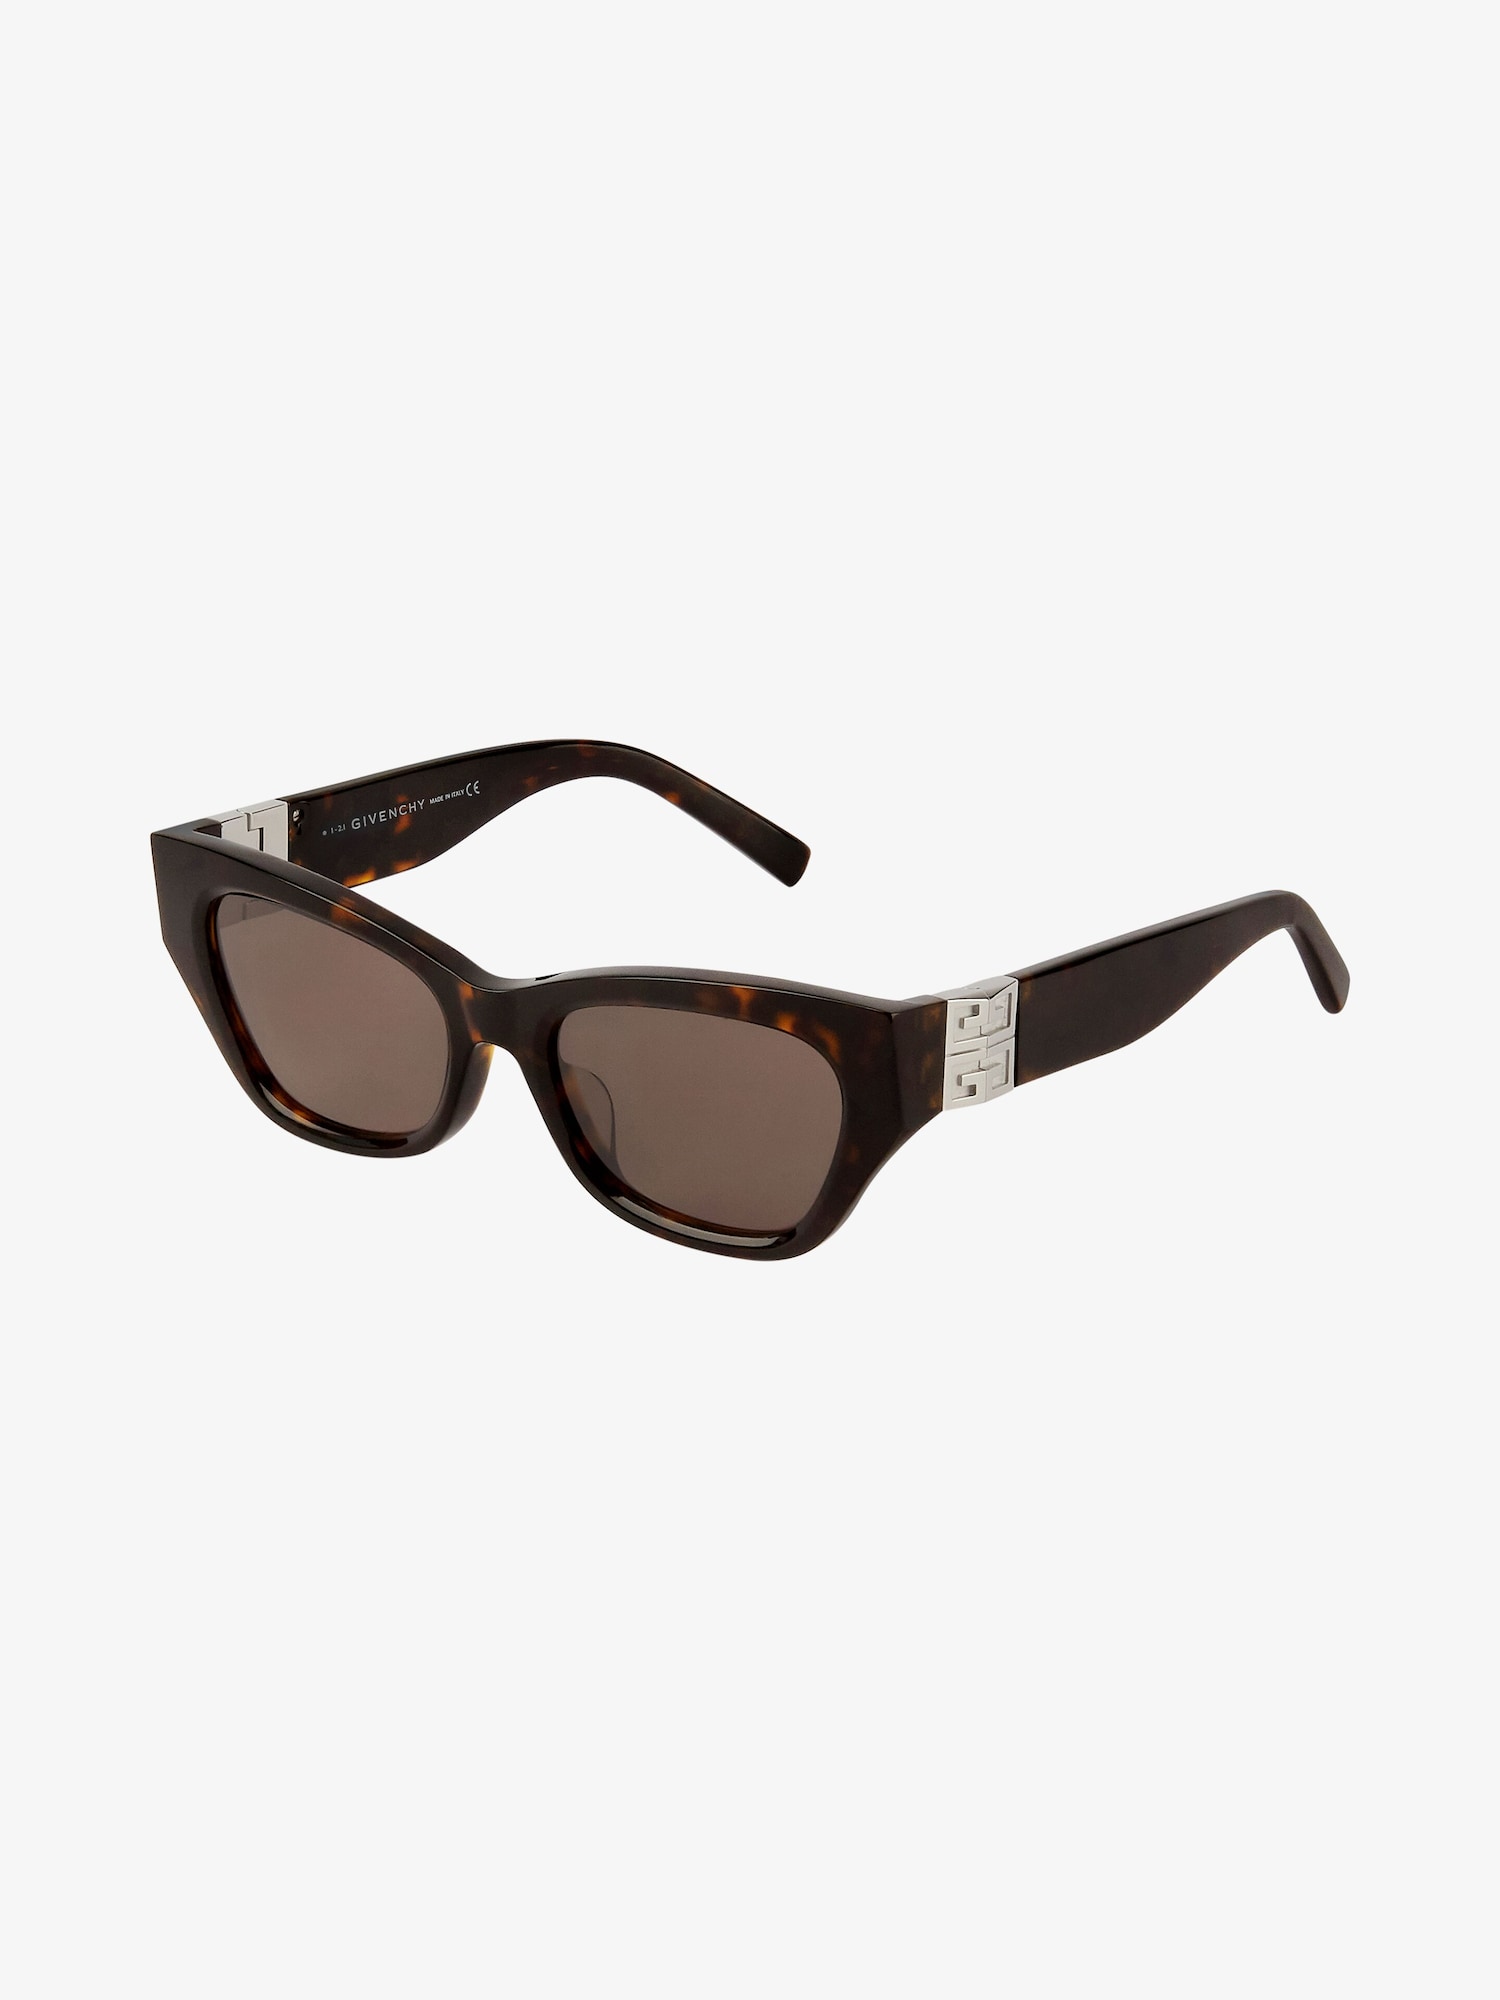 4G sunglasses in acetate | Givenchy GB | Givenchy